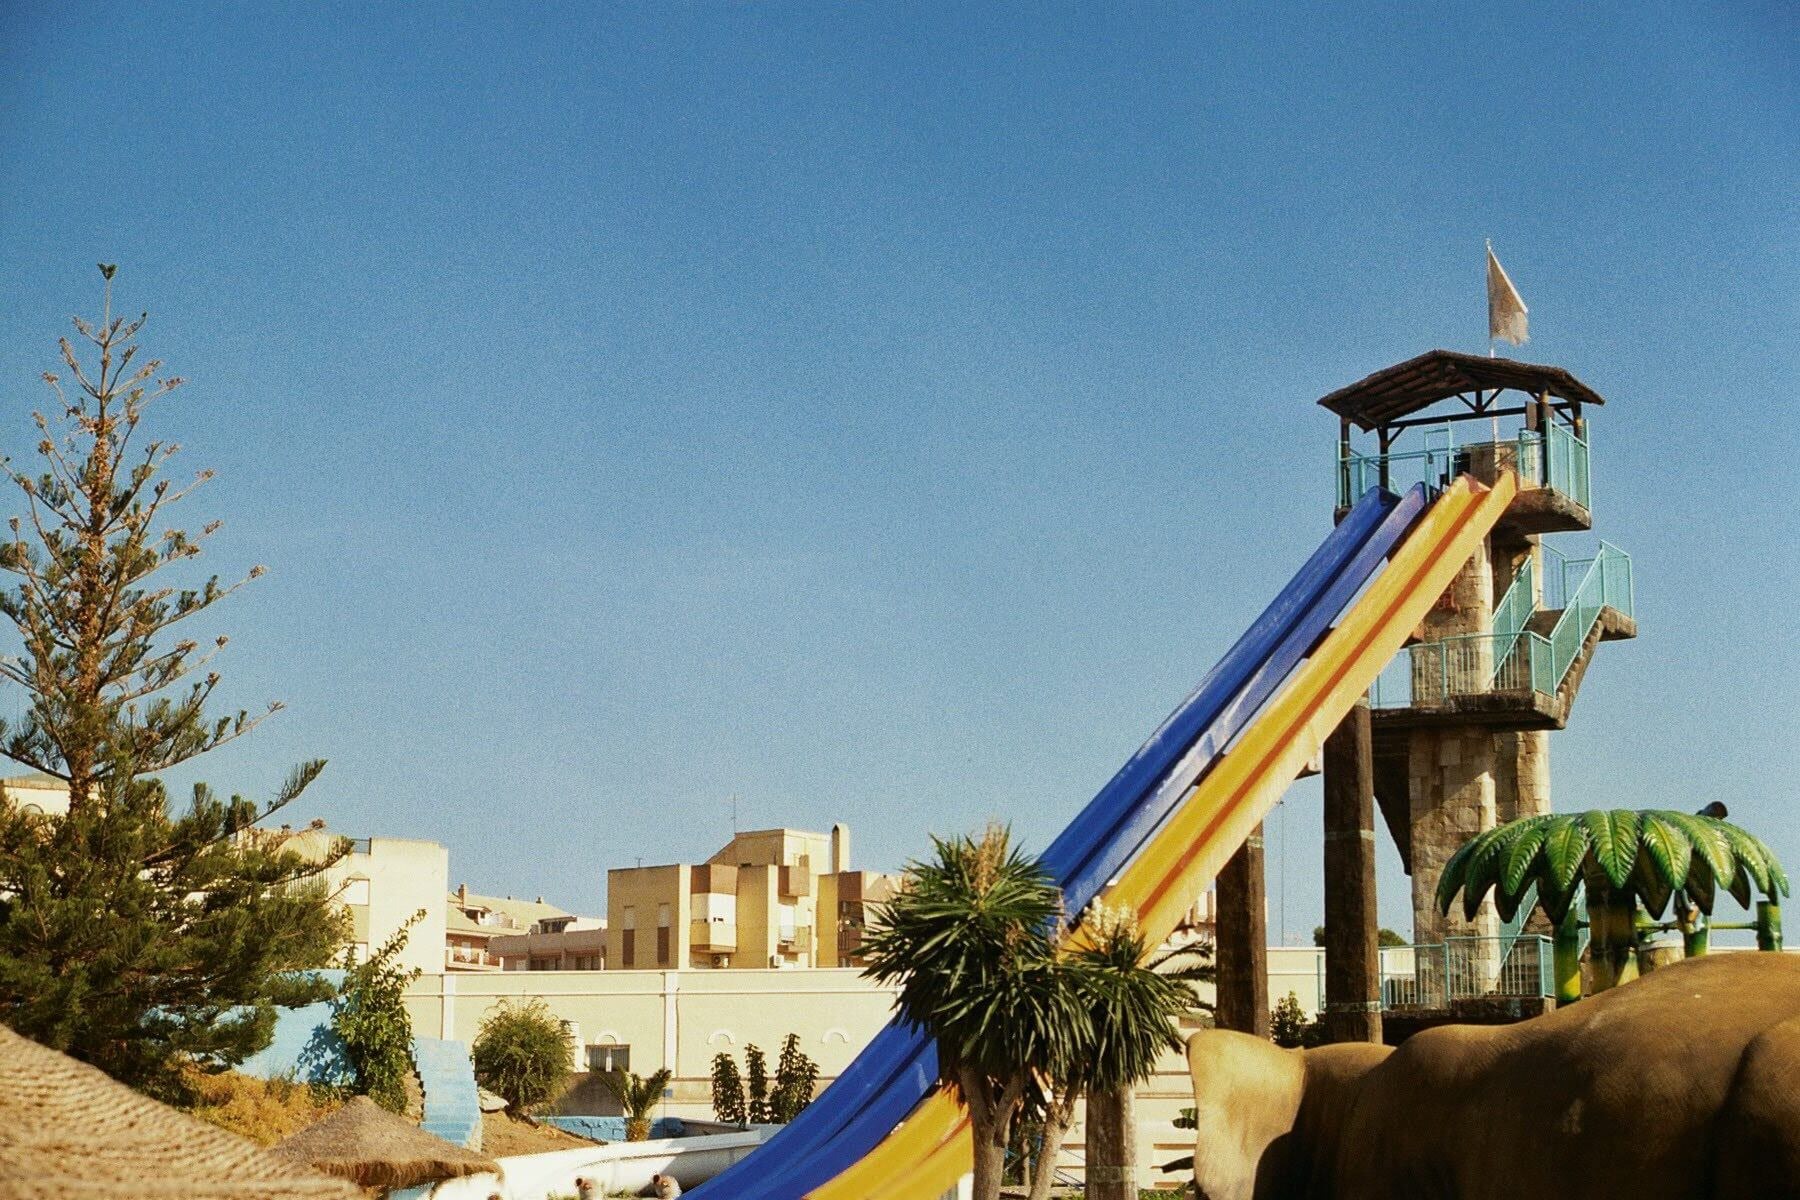 Photo of straight, orange and blue waterslides in southern Europe during summer